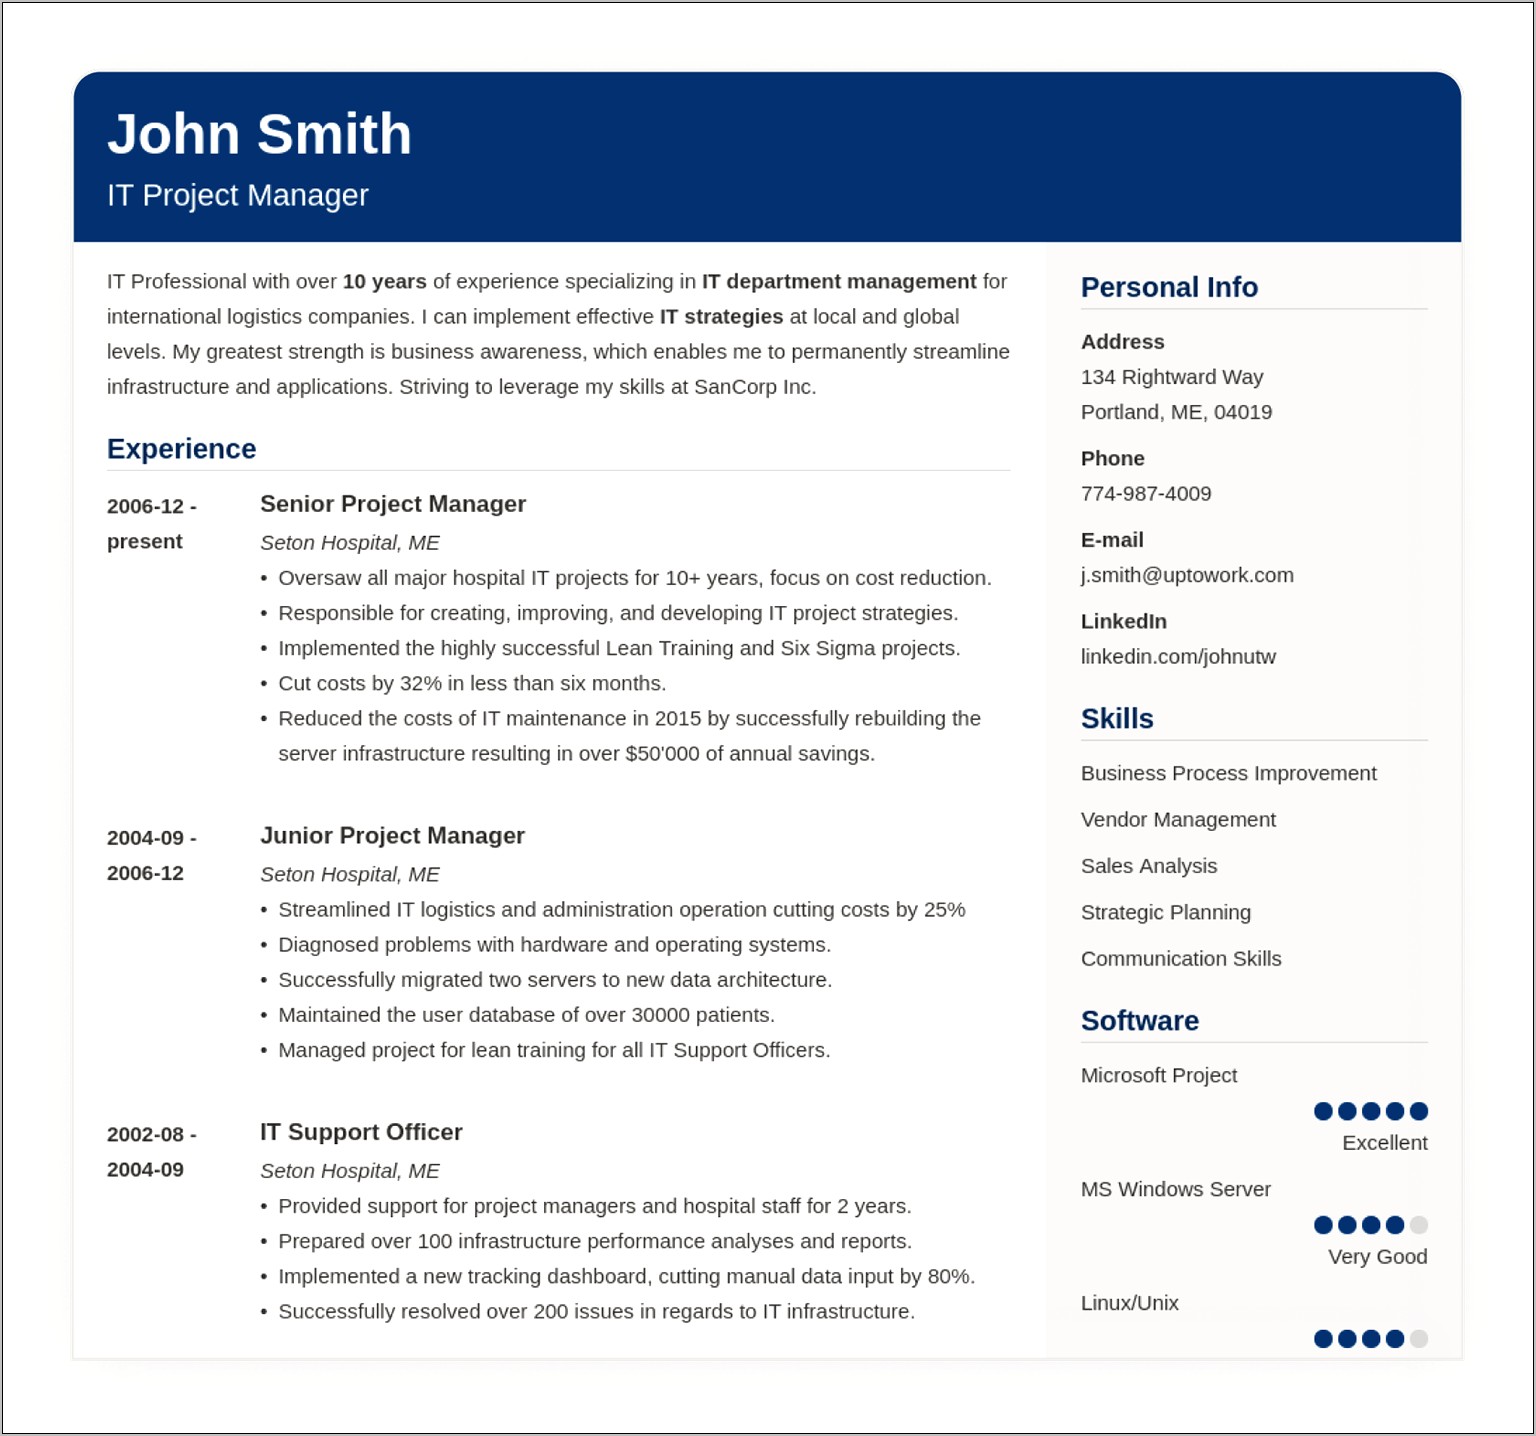 Excellent Interpersonal Skills Resume Example